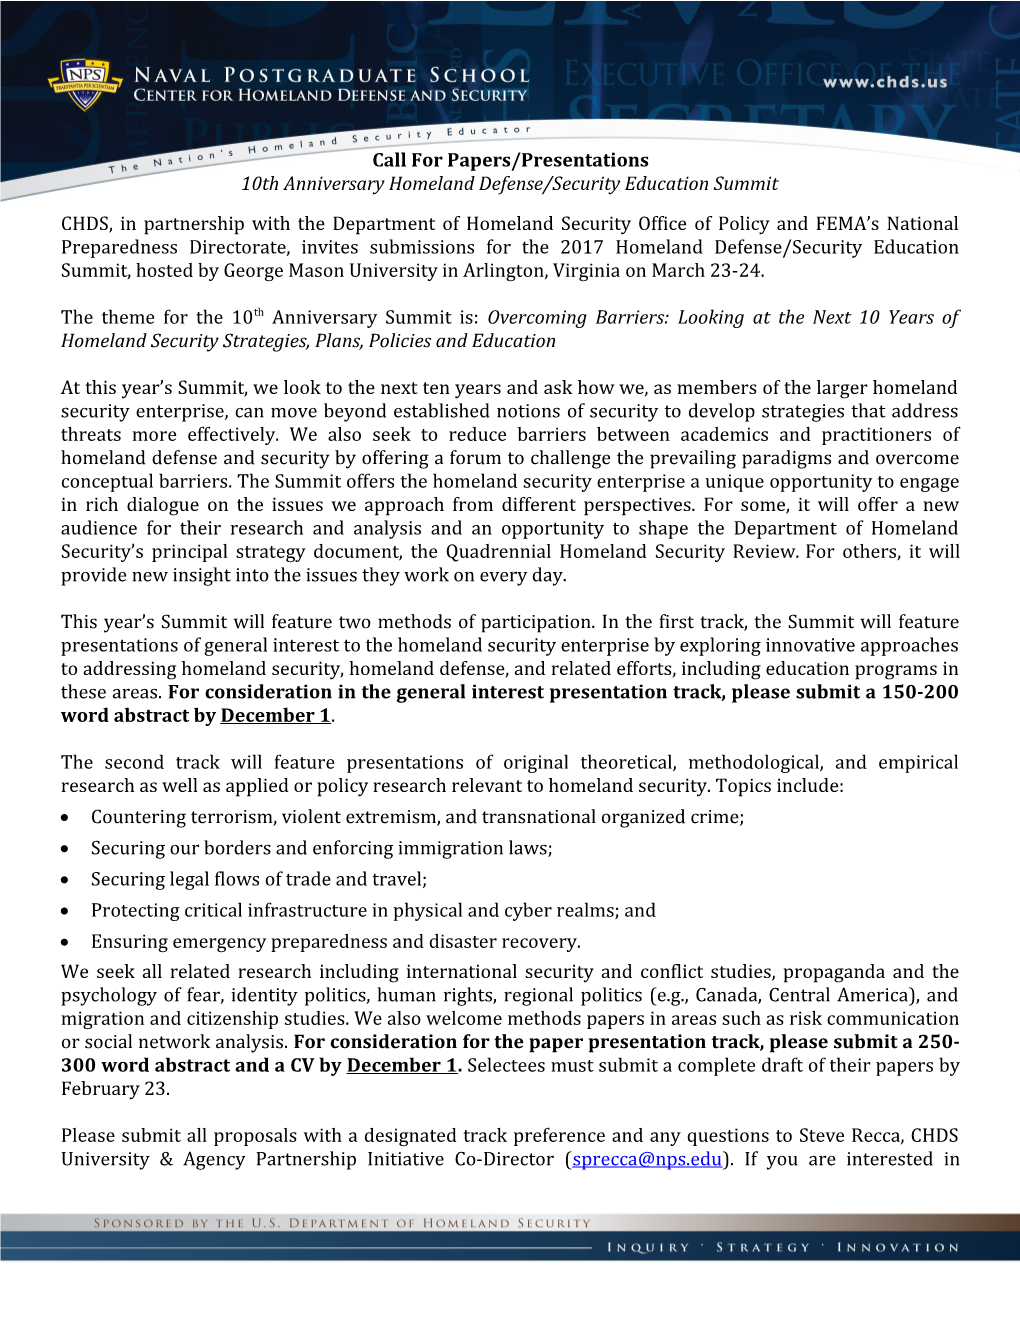 Call for Papers/Presentations